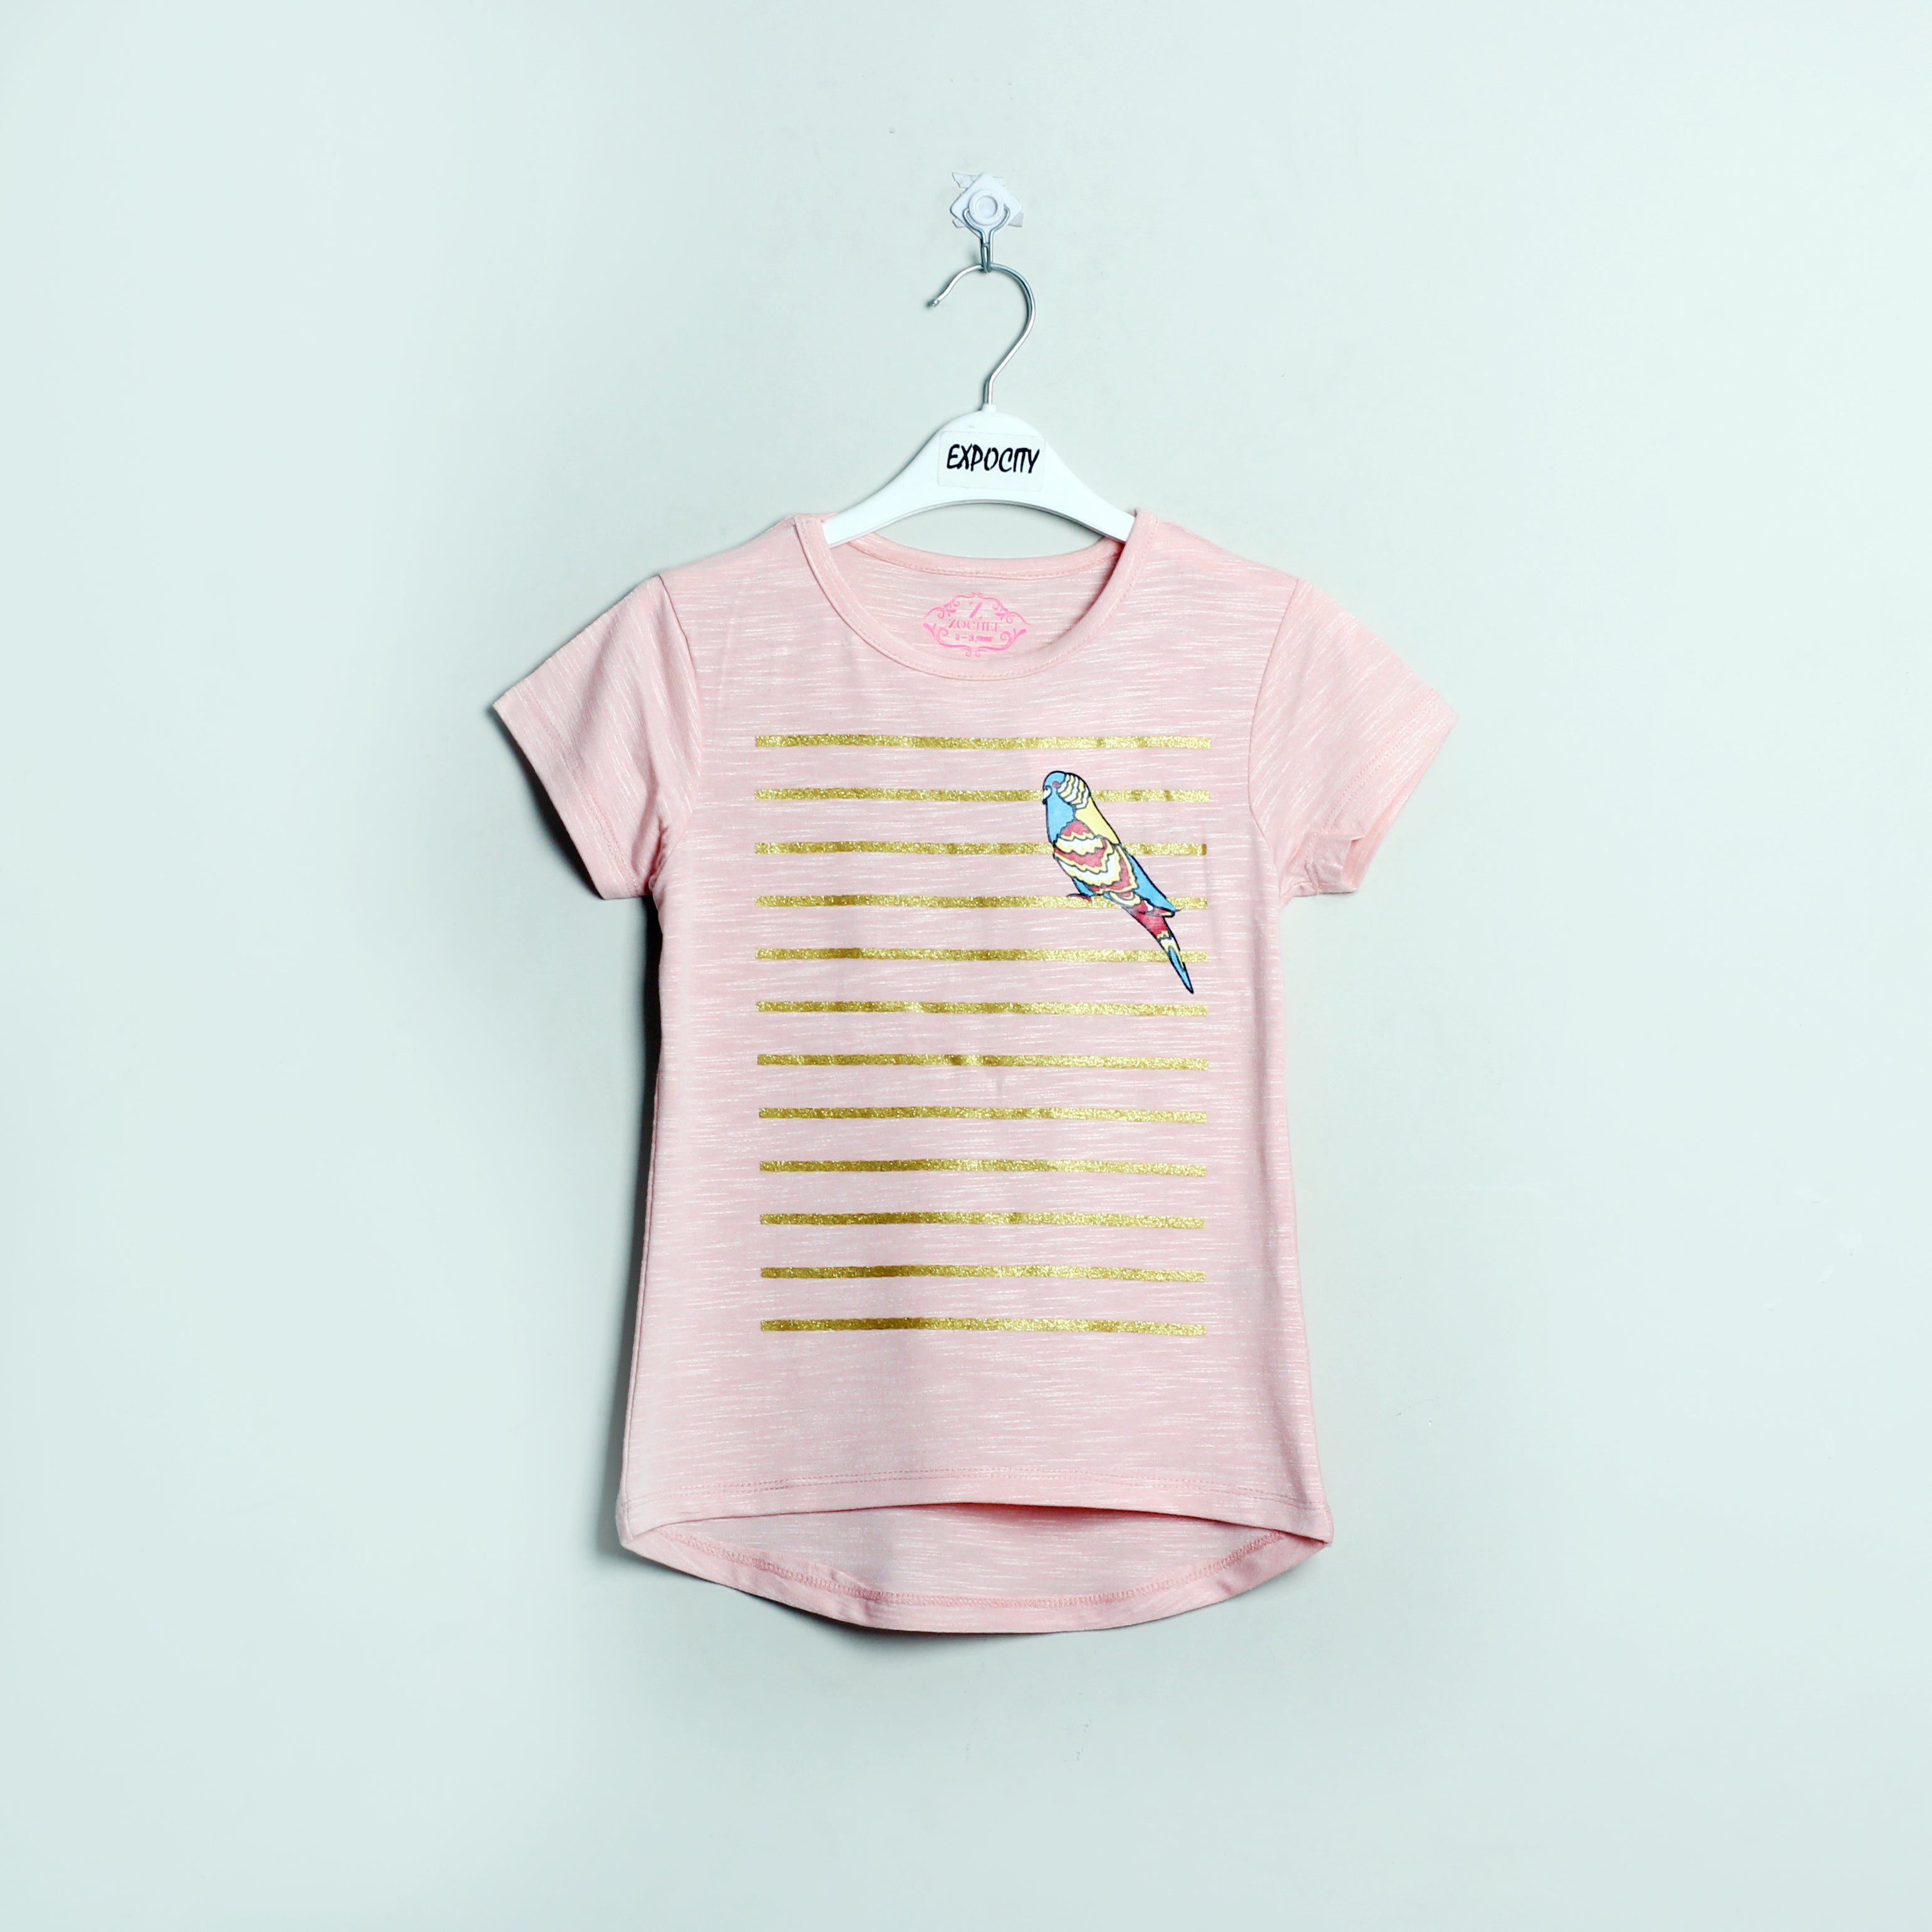 Baby Pink Parrot Printed Top - Expo City